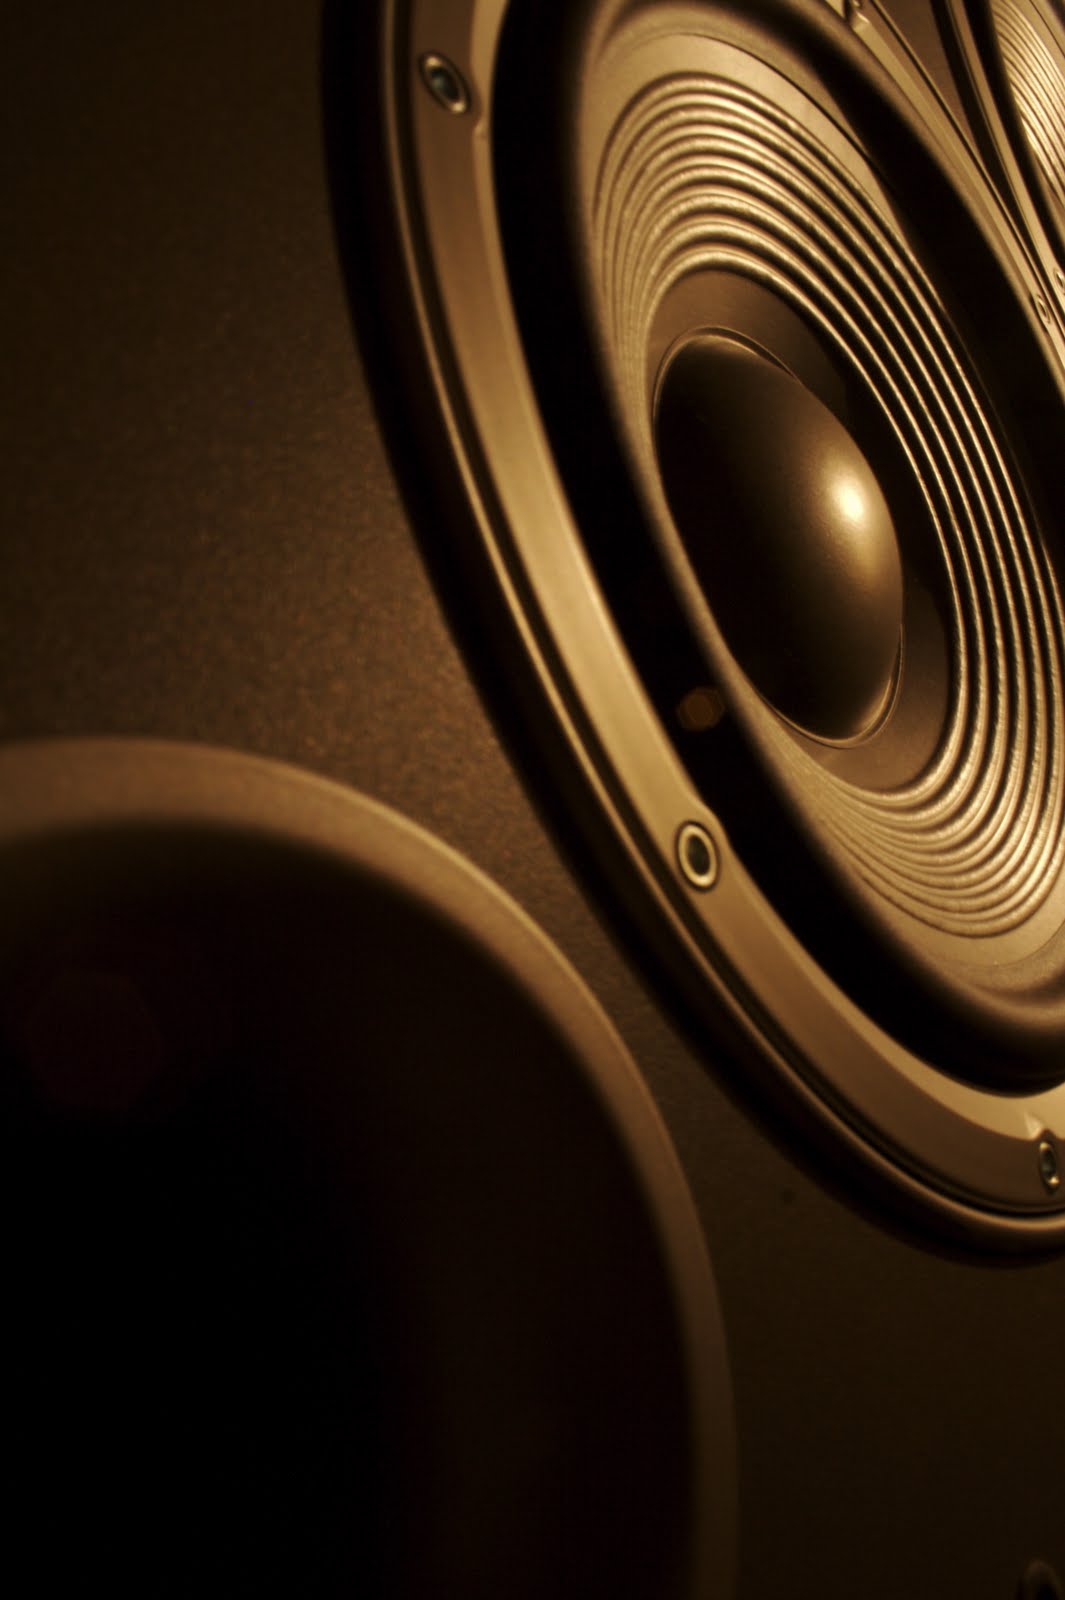 Speakers HD Music Wallpapers Stock Photos Download Free Wallpapers in